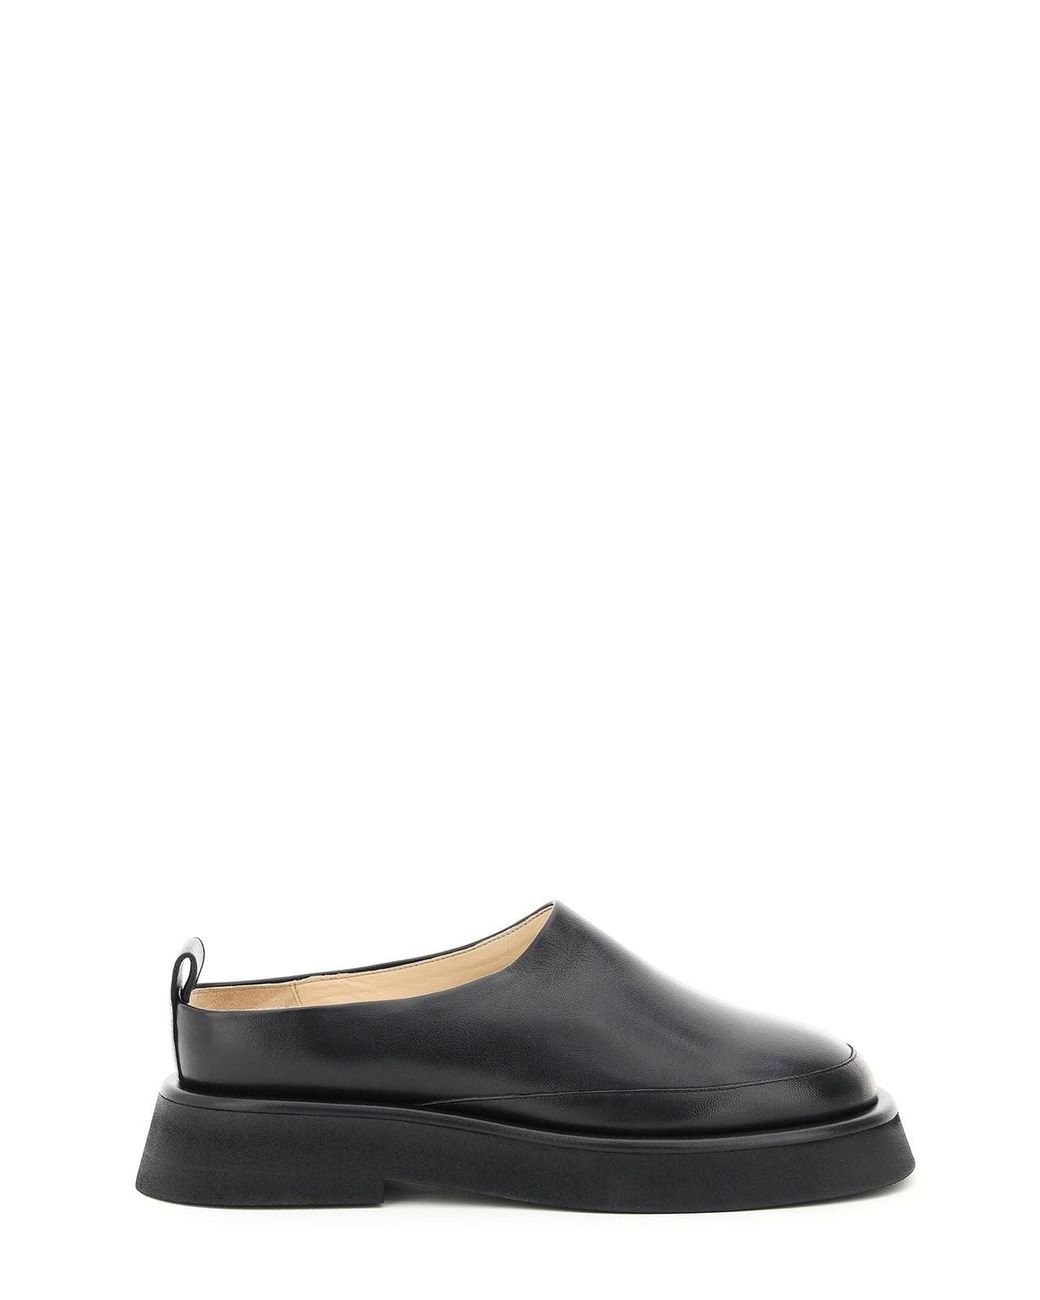 Wandler Rosa Loafers in Black | Lyst